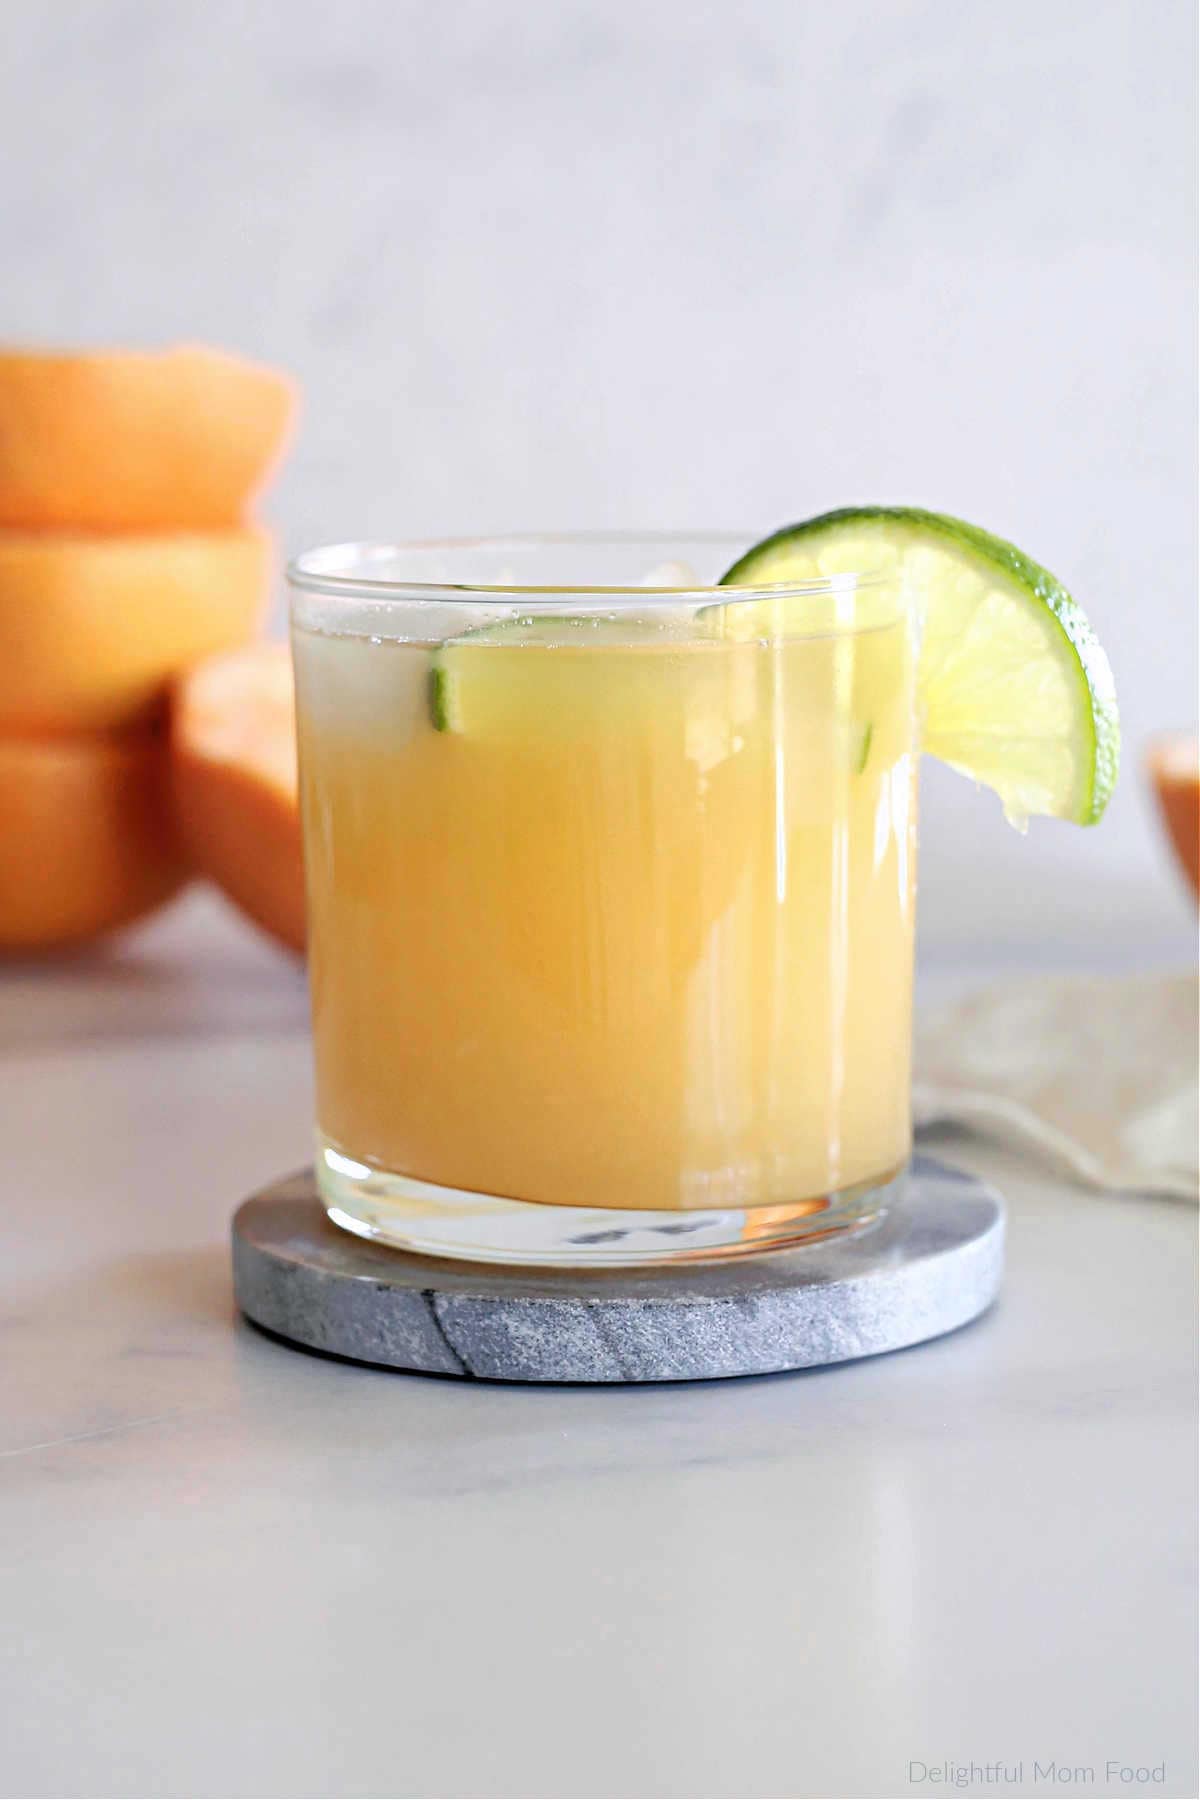 Grapefruit juice recipe drink in a glass for weight loss and to burn fat in the body.